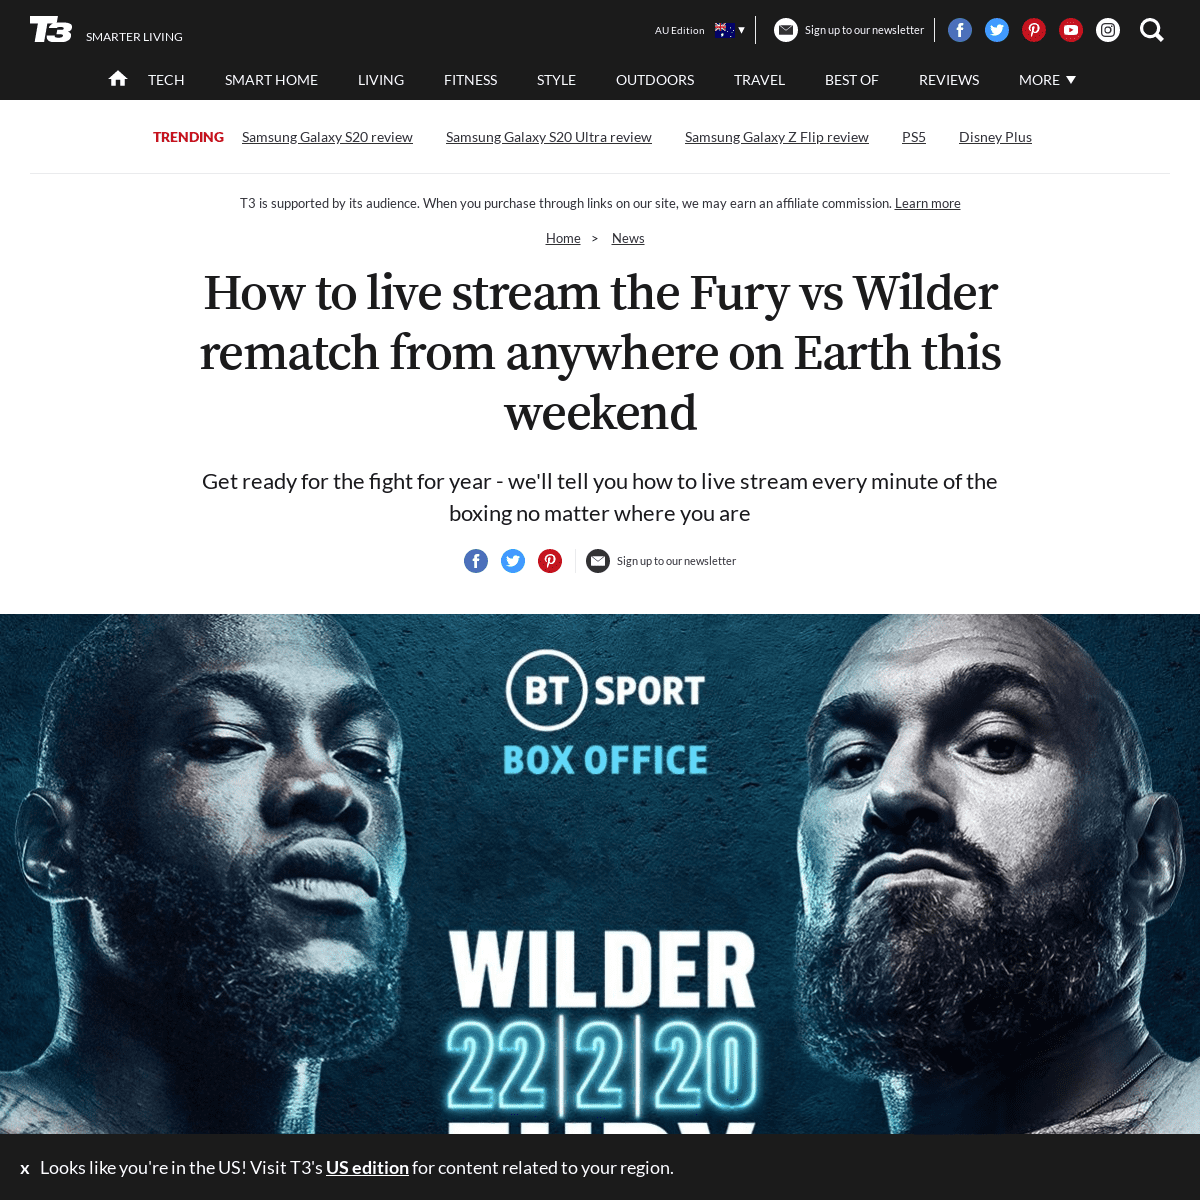 A complete backup of www.t3.com/au/news/how-to-live-stream-the-fury-vs-wilder-rematch-from-anywhere-on-earth